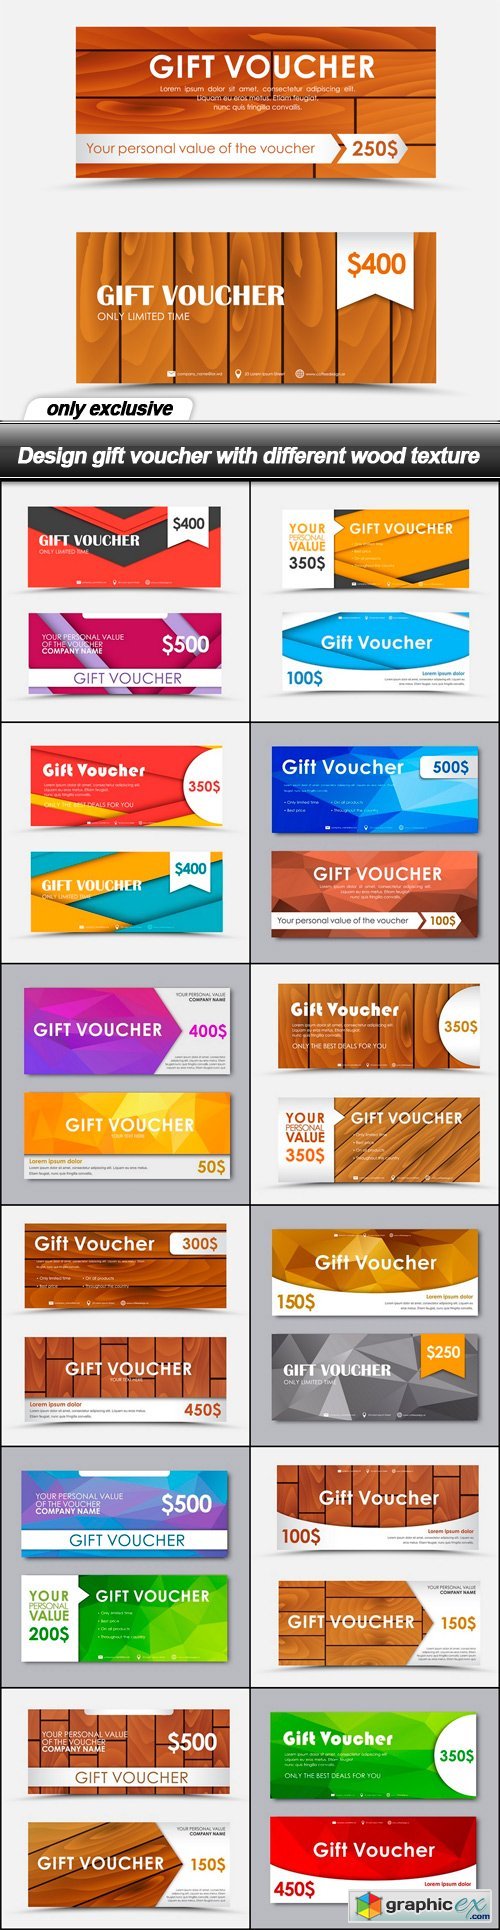 Design gift voucher with different wood texture - 13 EPS